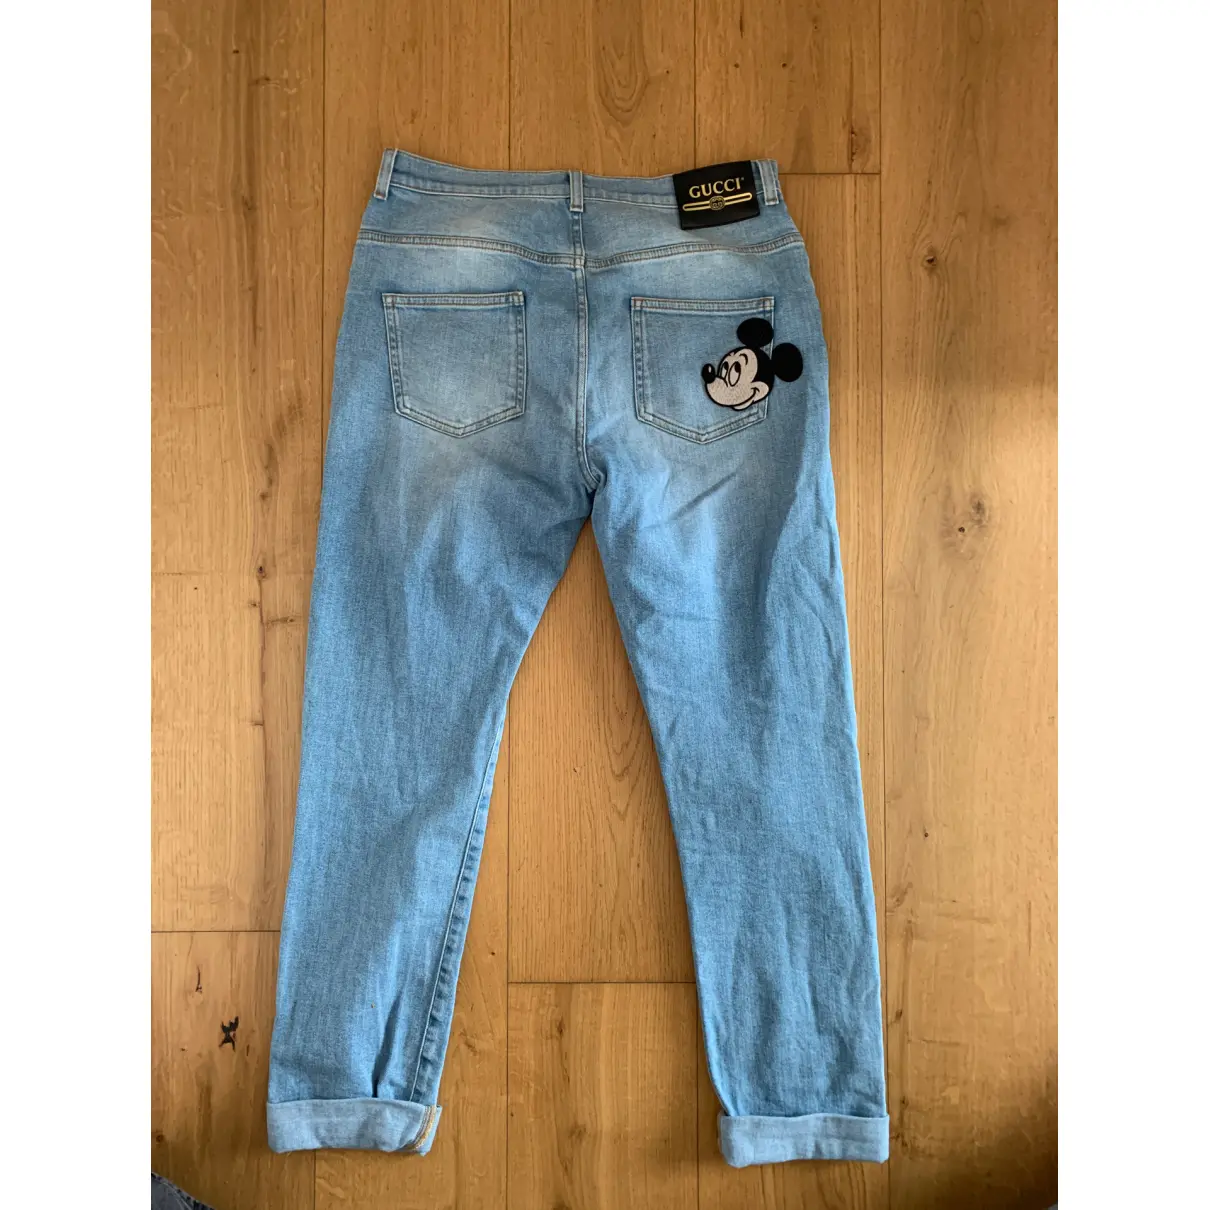 Buy Disney x Gucci Straight jeans online